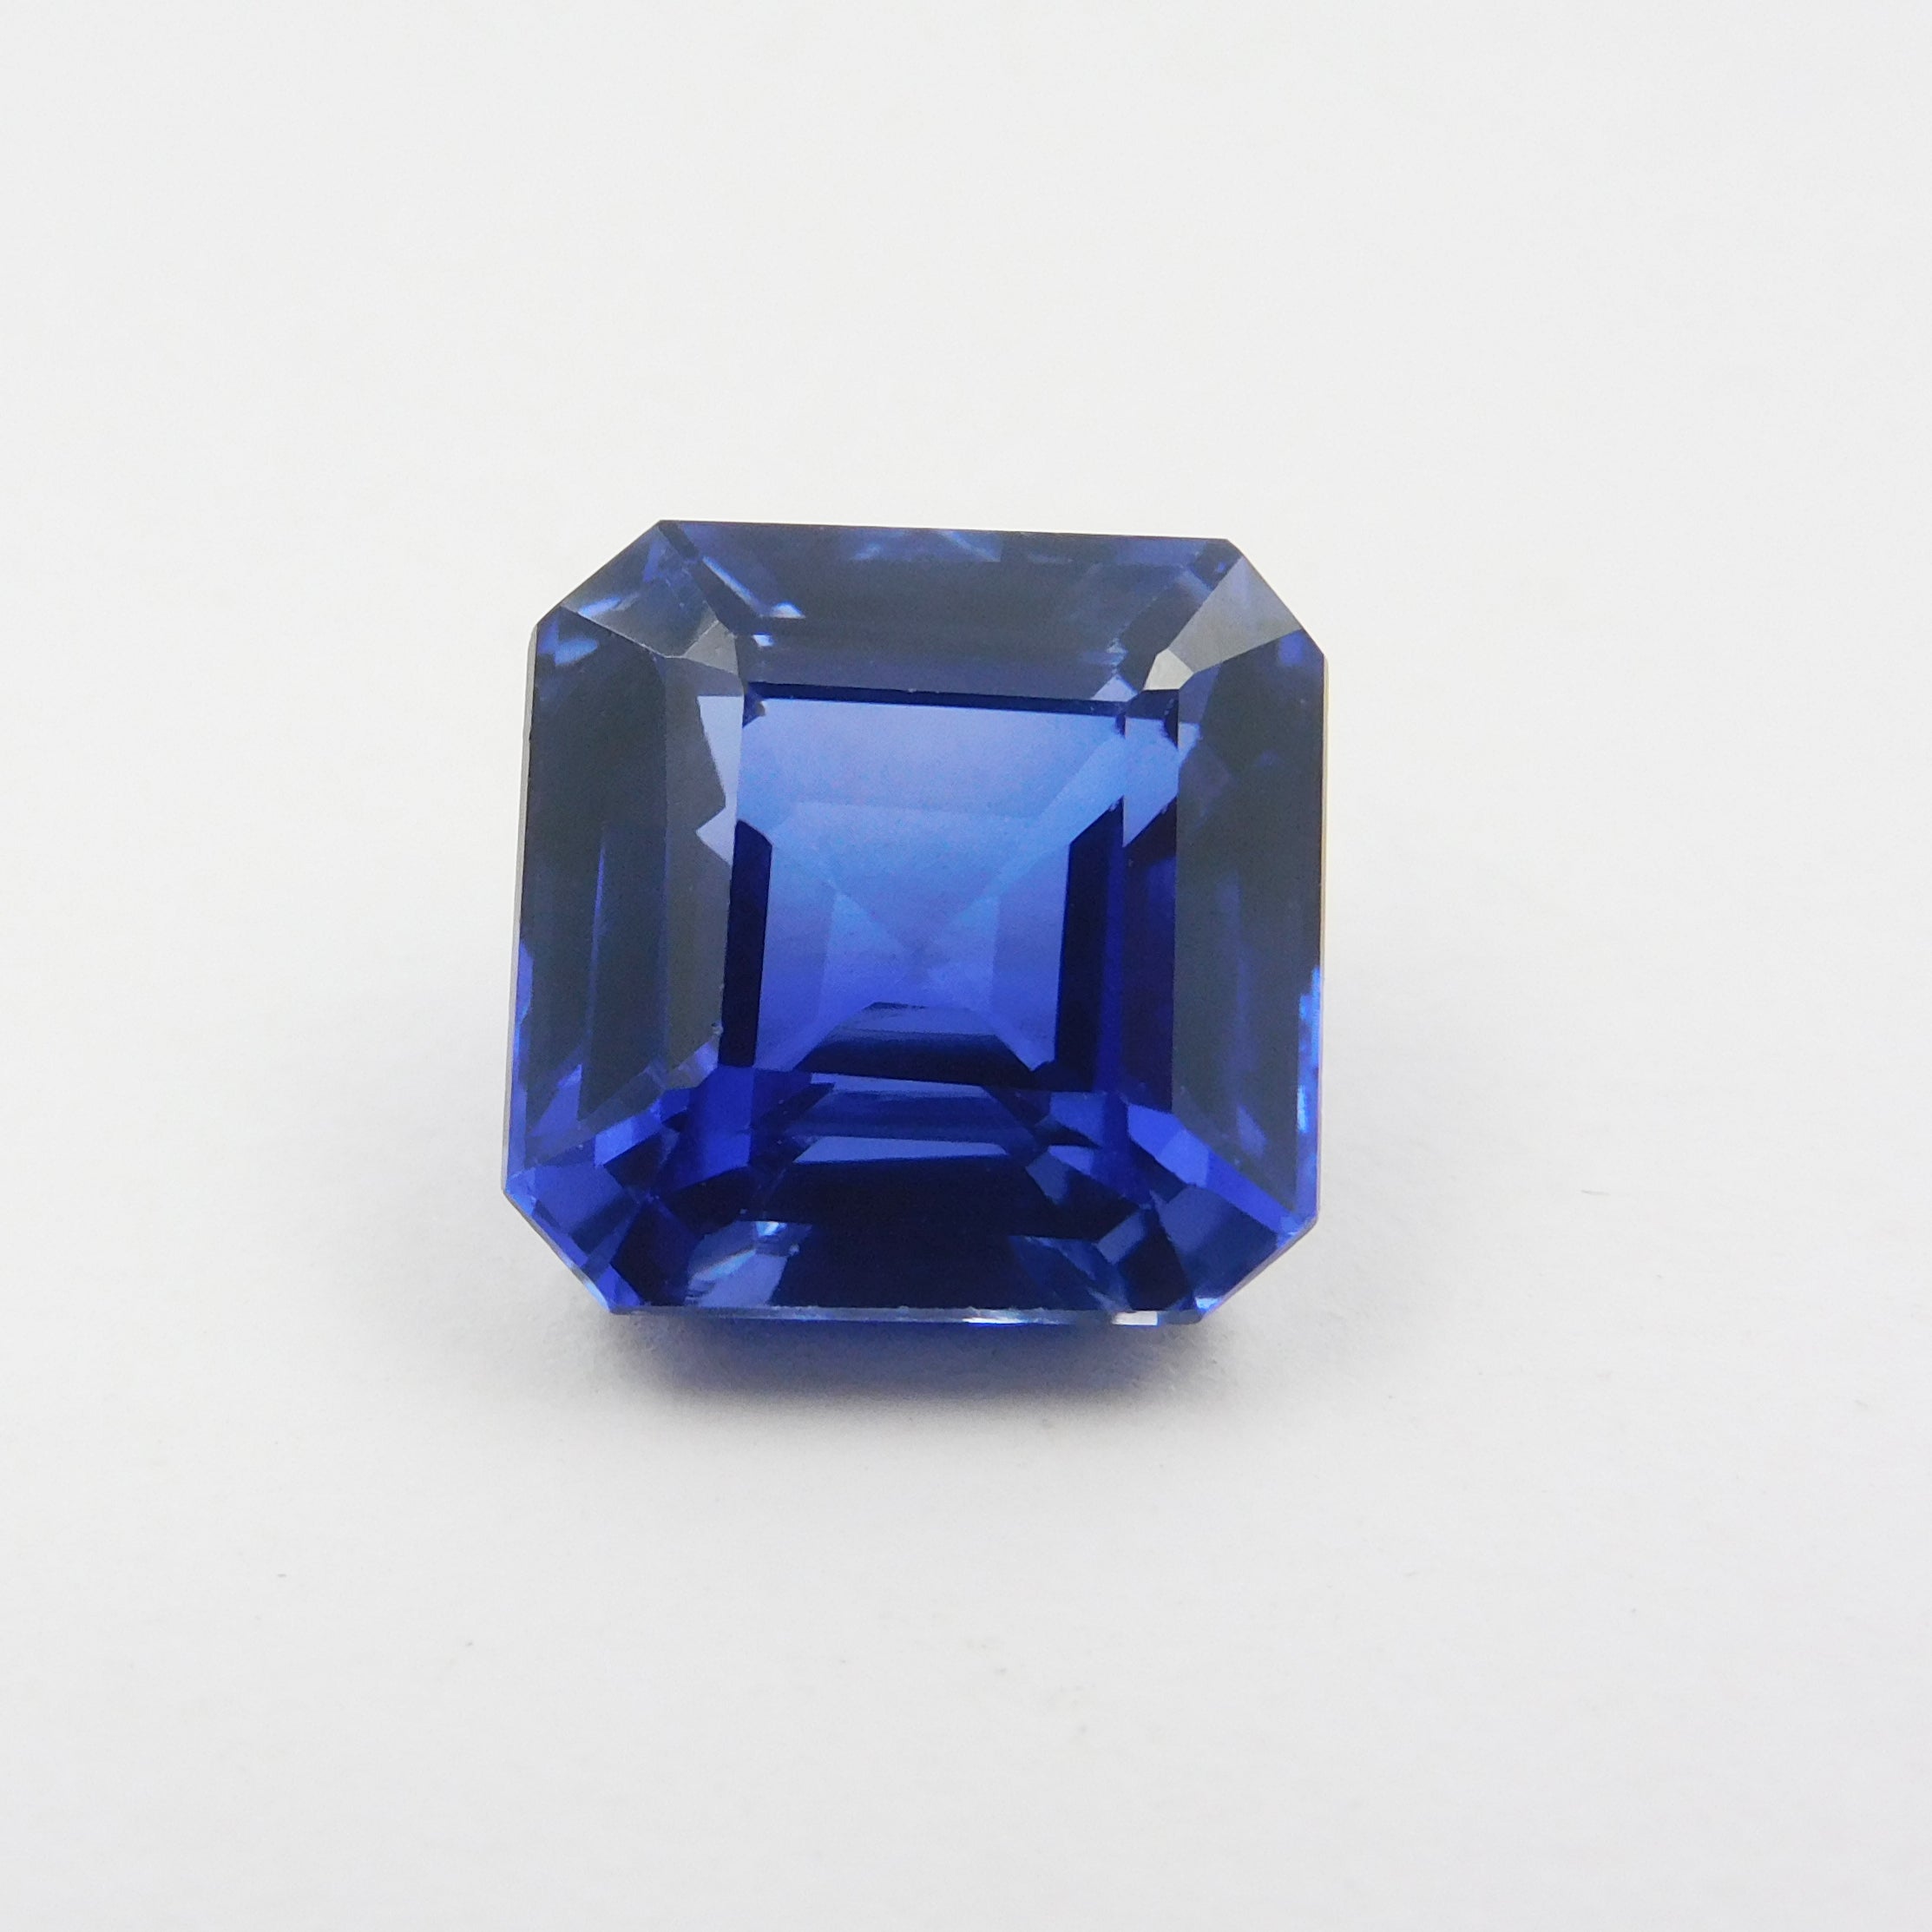 Exclusive Offer !!! Natural Certified 9.65 Carat Square Cut Blue Dark Tanzanite Loose Gemstone | Free Shipping With Extra Special Gift | Charming Tanzanite" DARK BLUE "